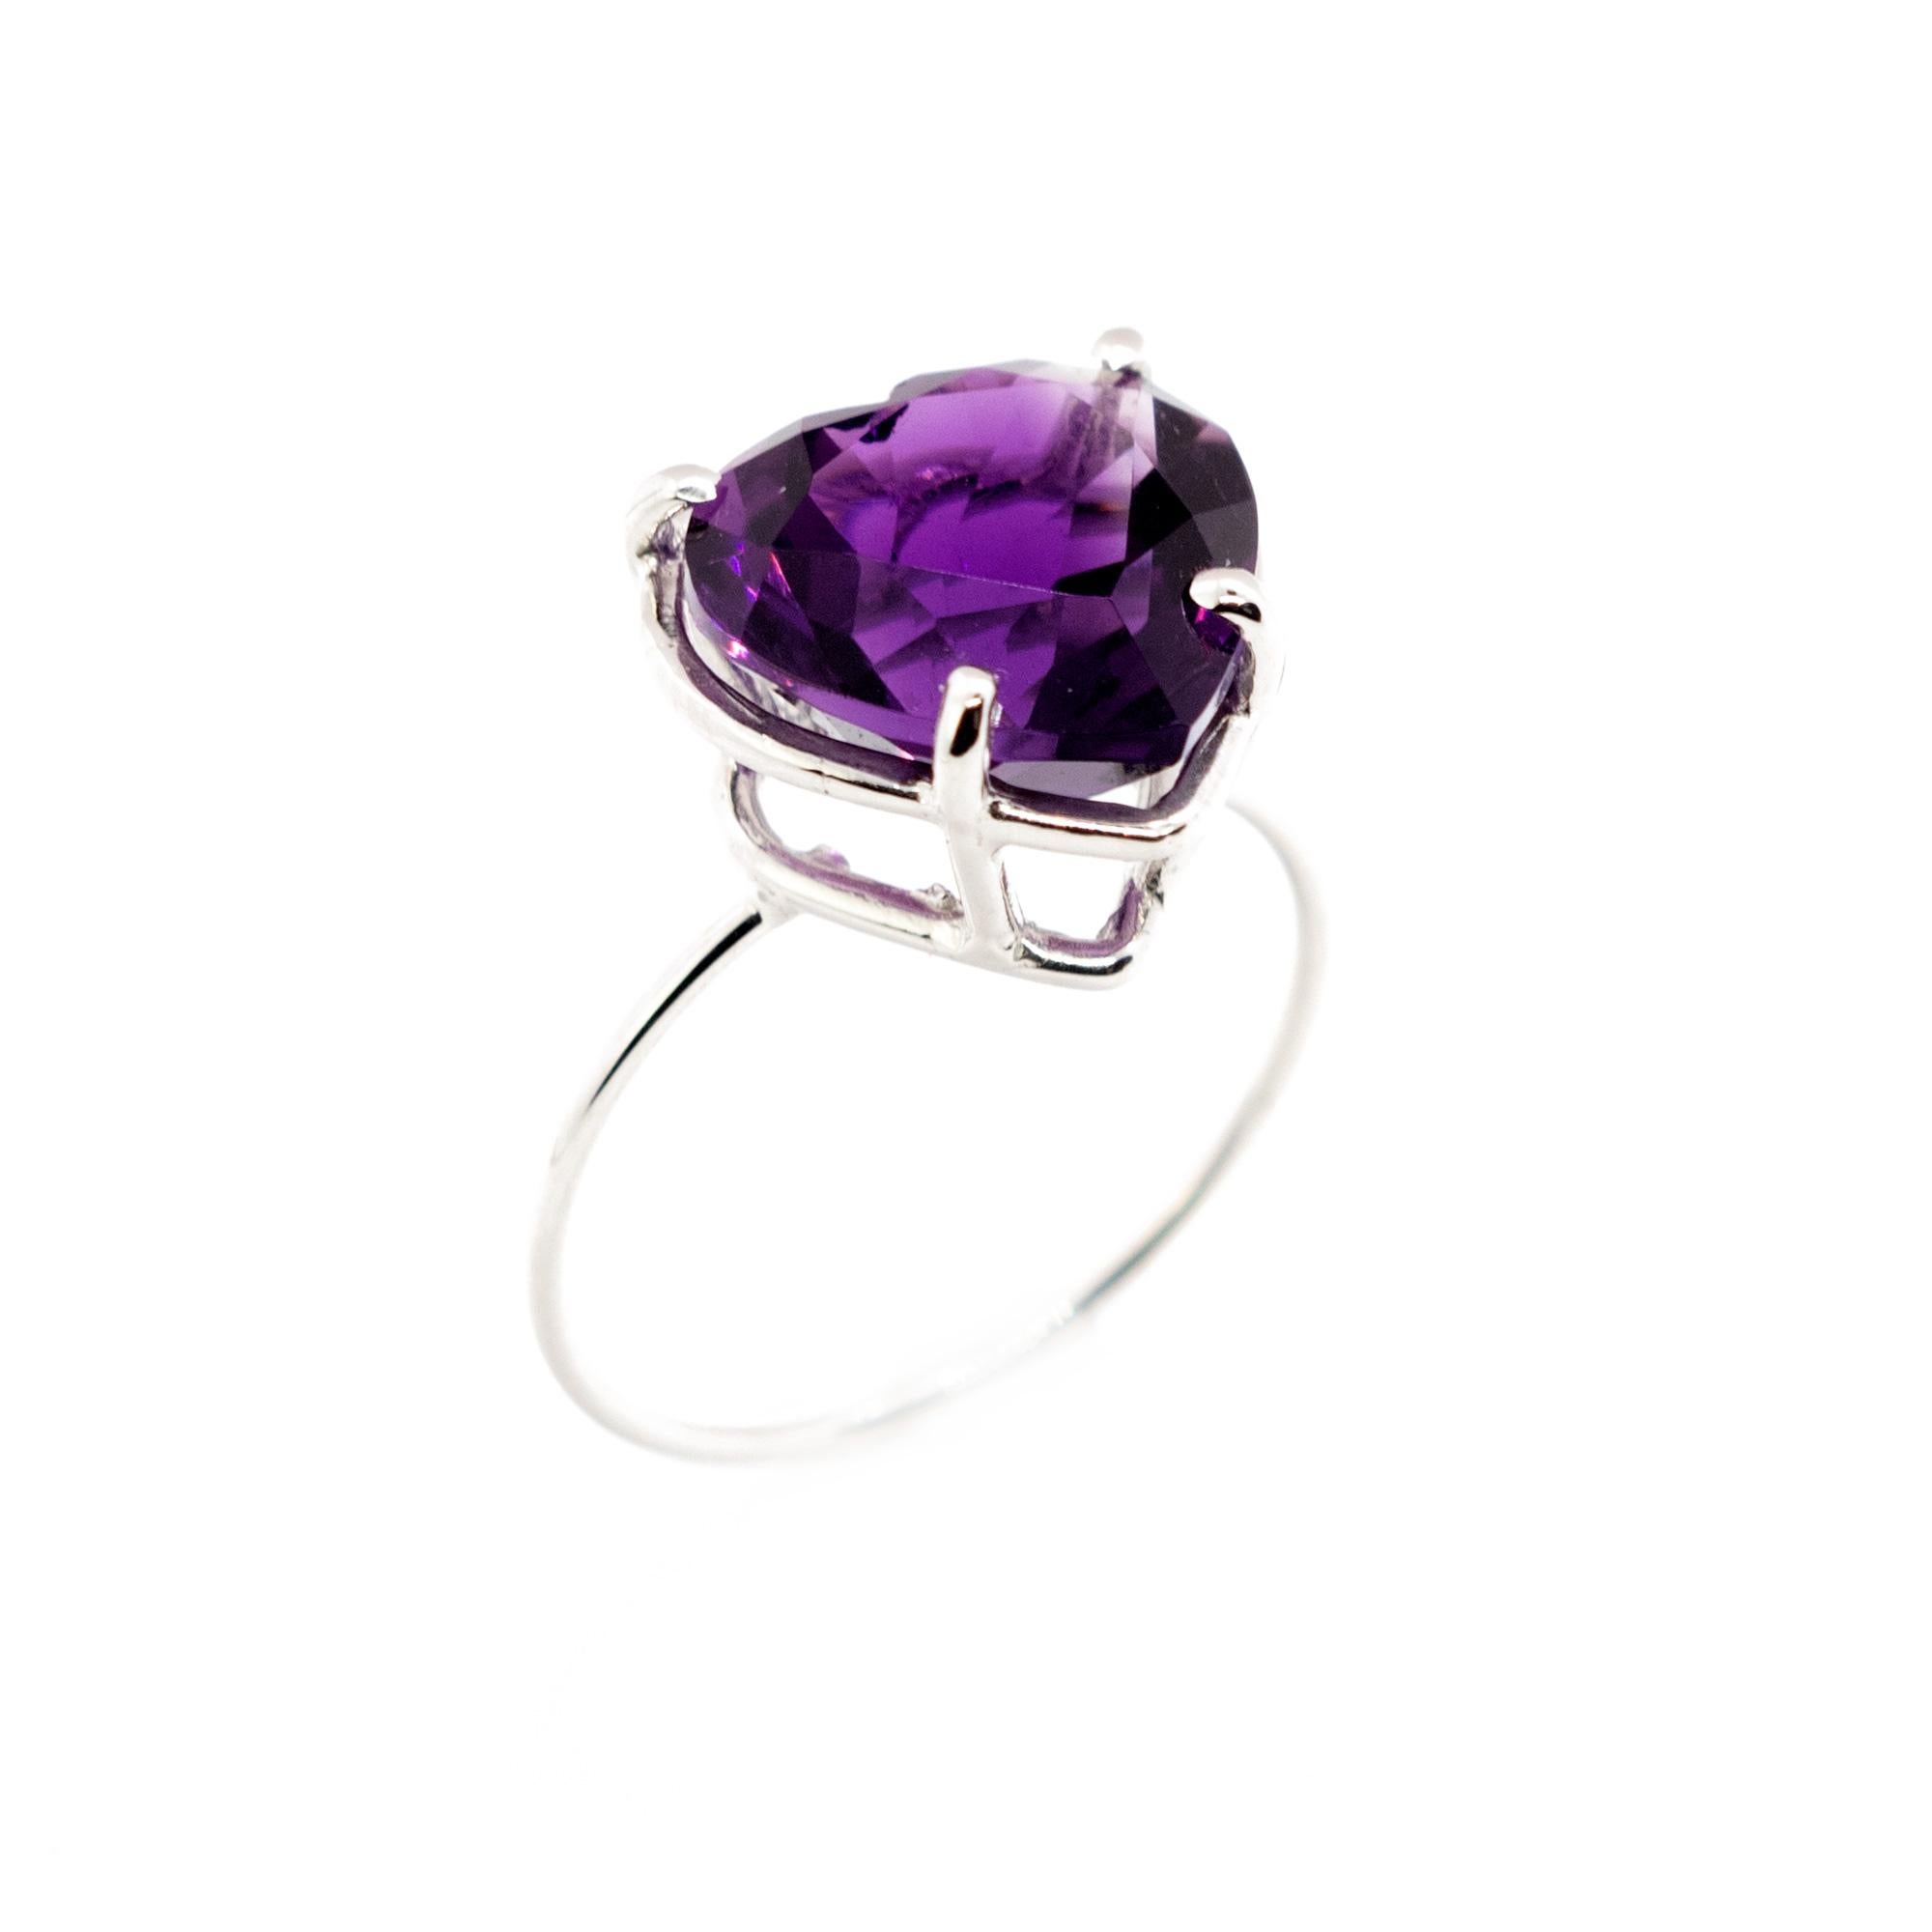 Marvellous handmade 18 karat white gold band thin ring embellished with a wonderful heart shaped Amethyst. Open your intuition and enhance your senses to love. 

Inspired by strong feeling of love. The beating heart is used as an intensive form of